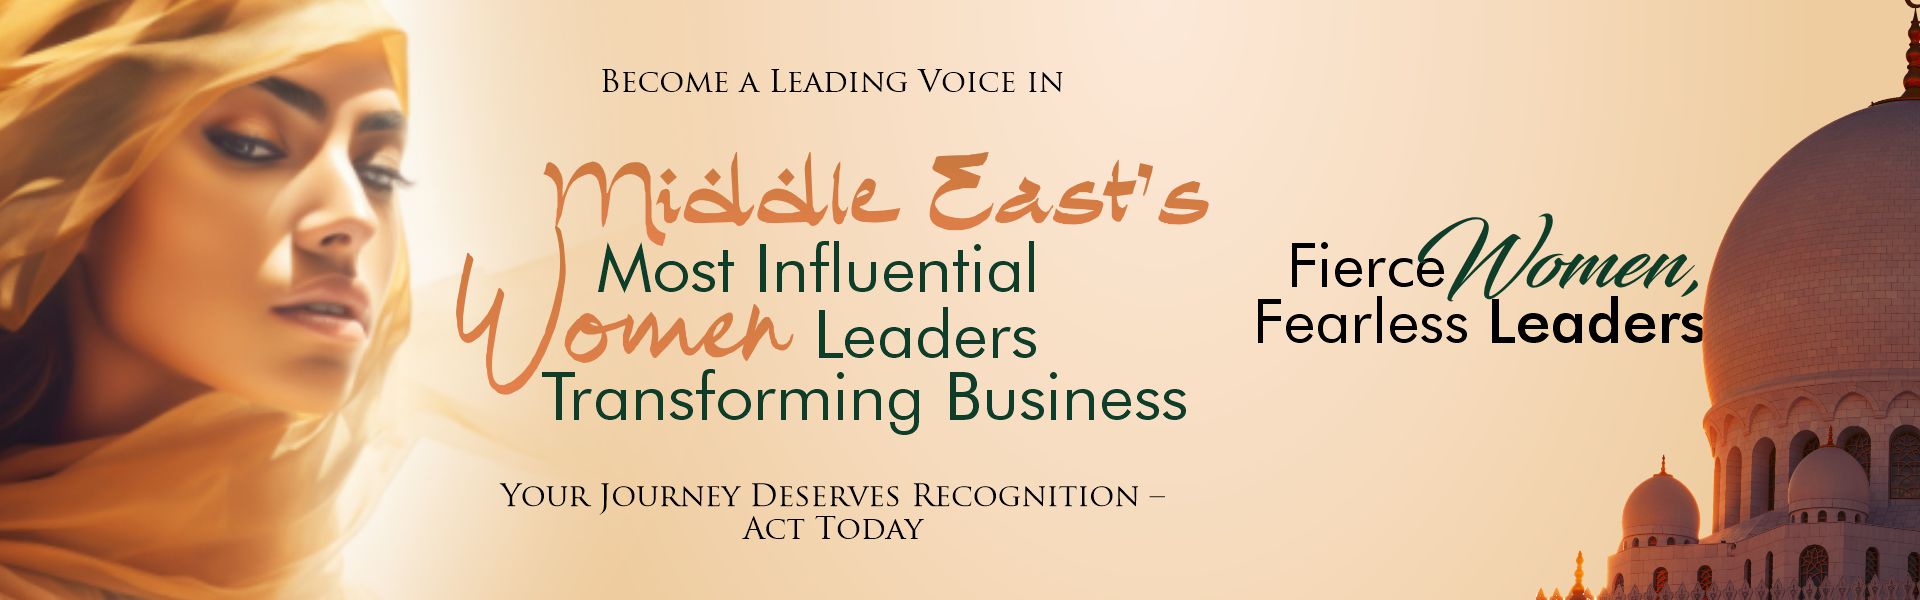 Middle East's Most Influential Women Leaders Transforming Business